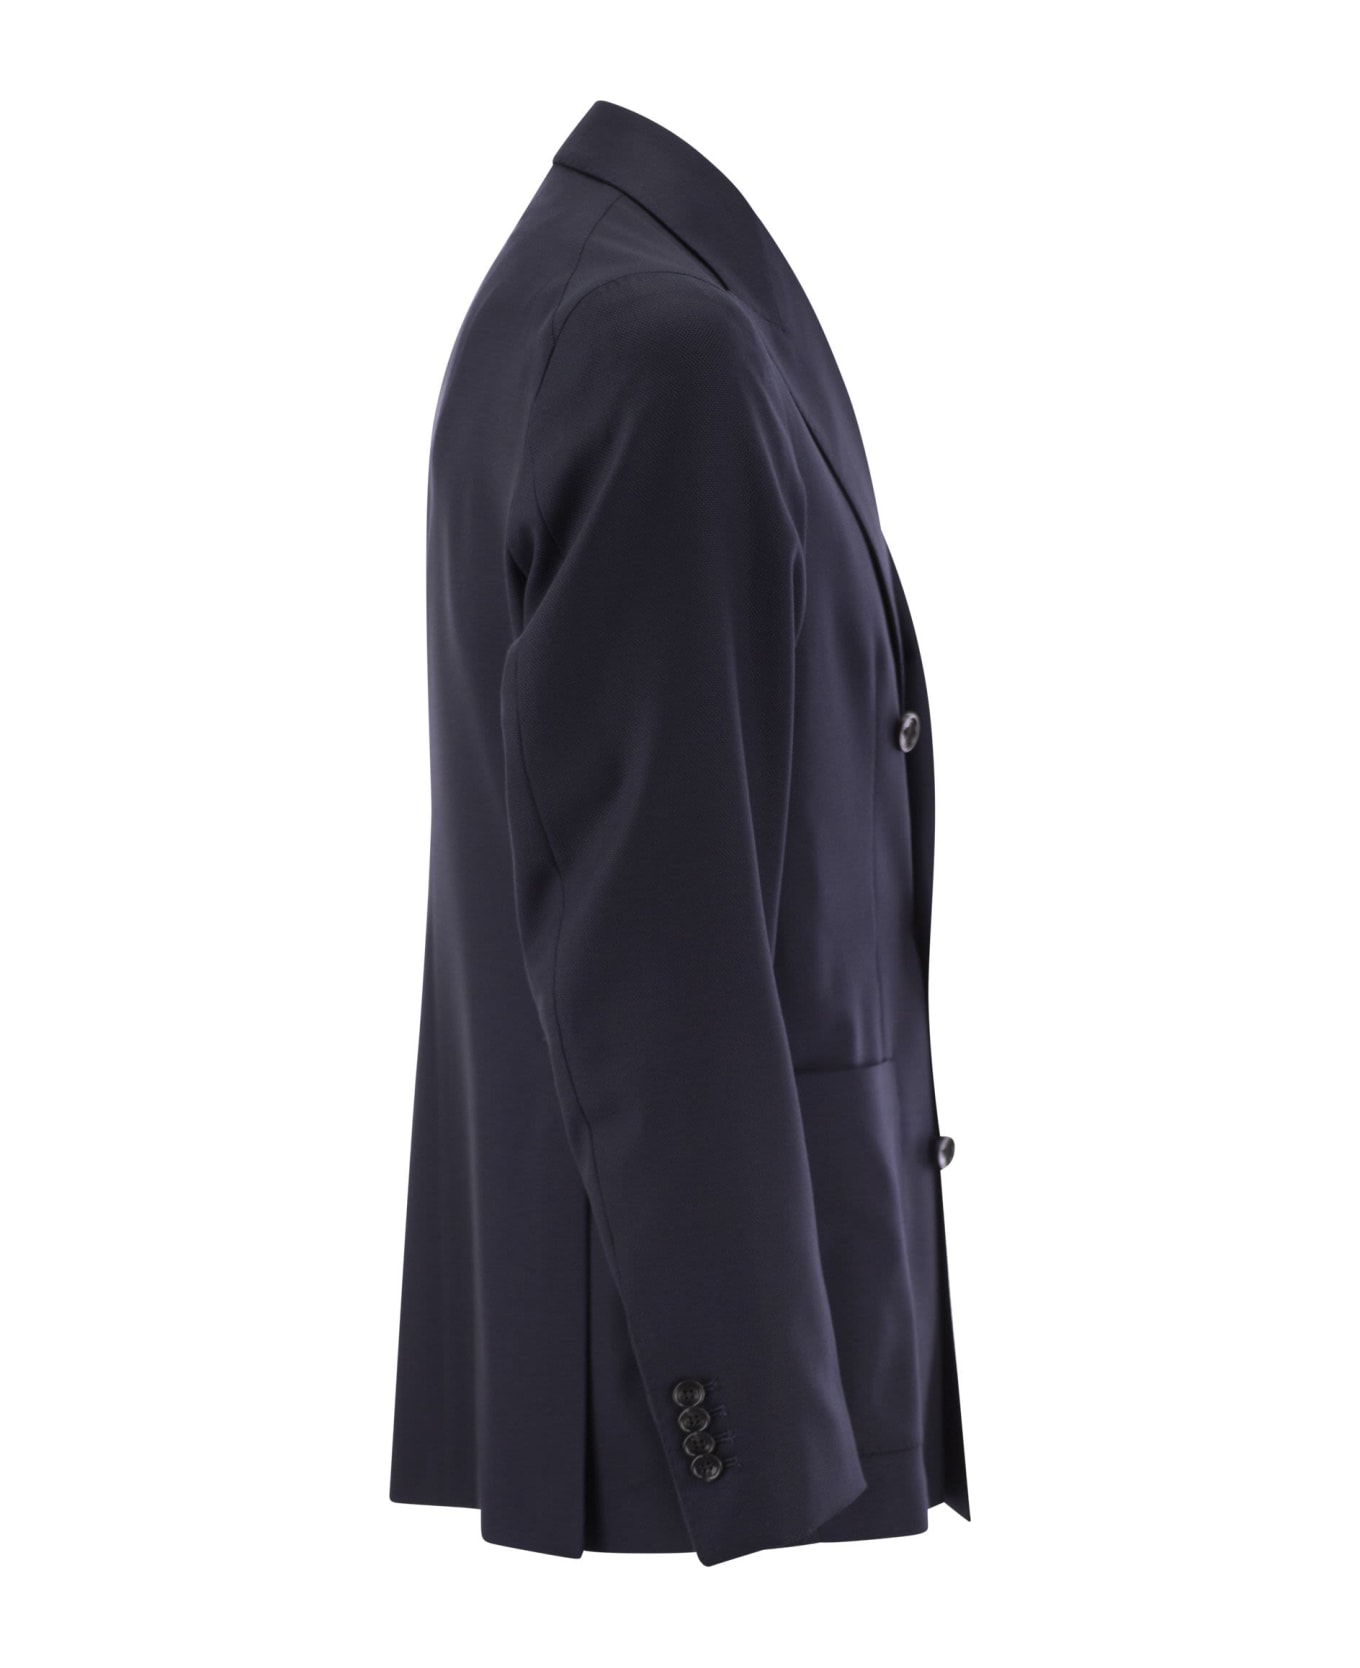 Tagliatore Double-breasted Cashmere Jacket - Blue スーツ